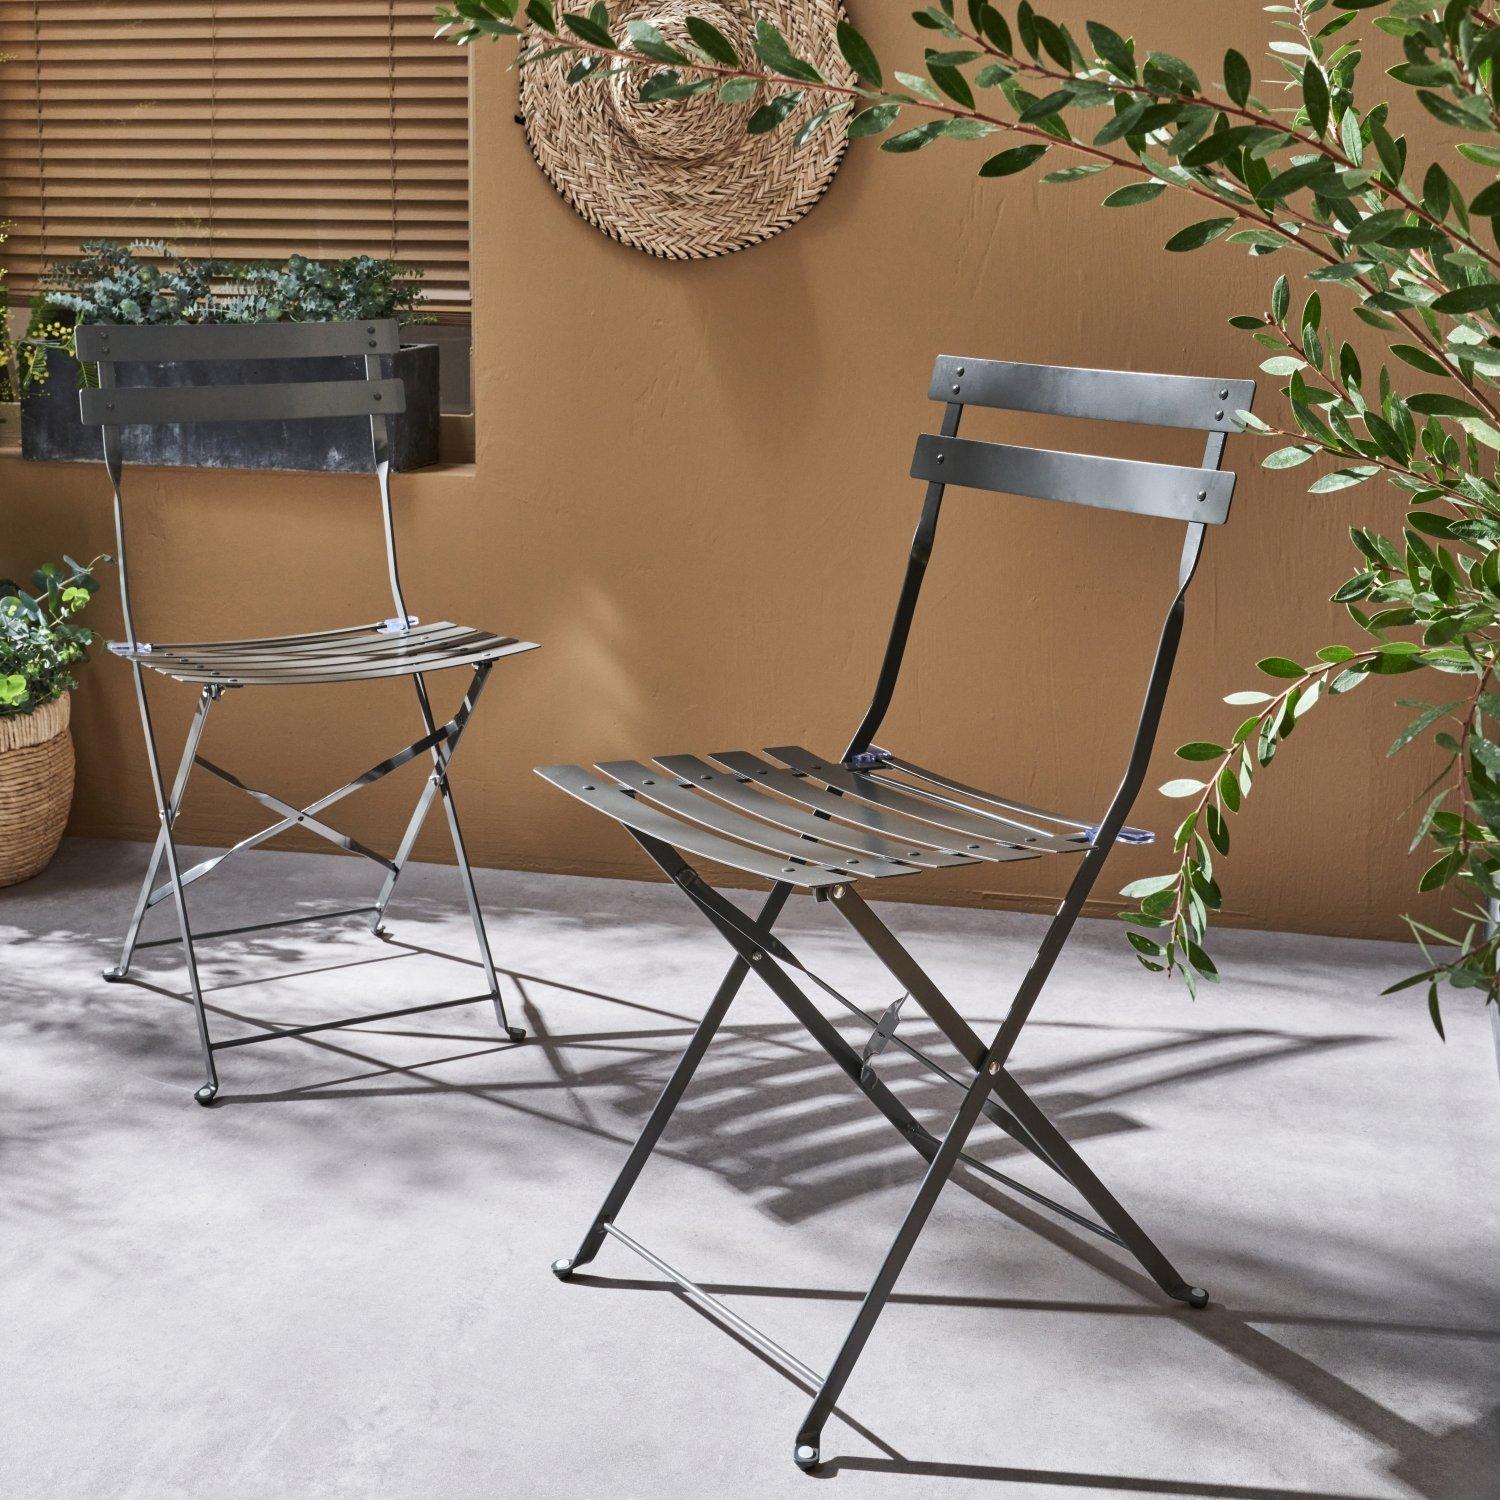 Pair Of Foldable Thermo-laquered Steel Bistro-style Chairs